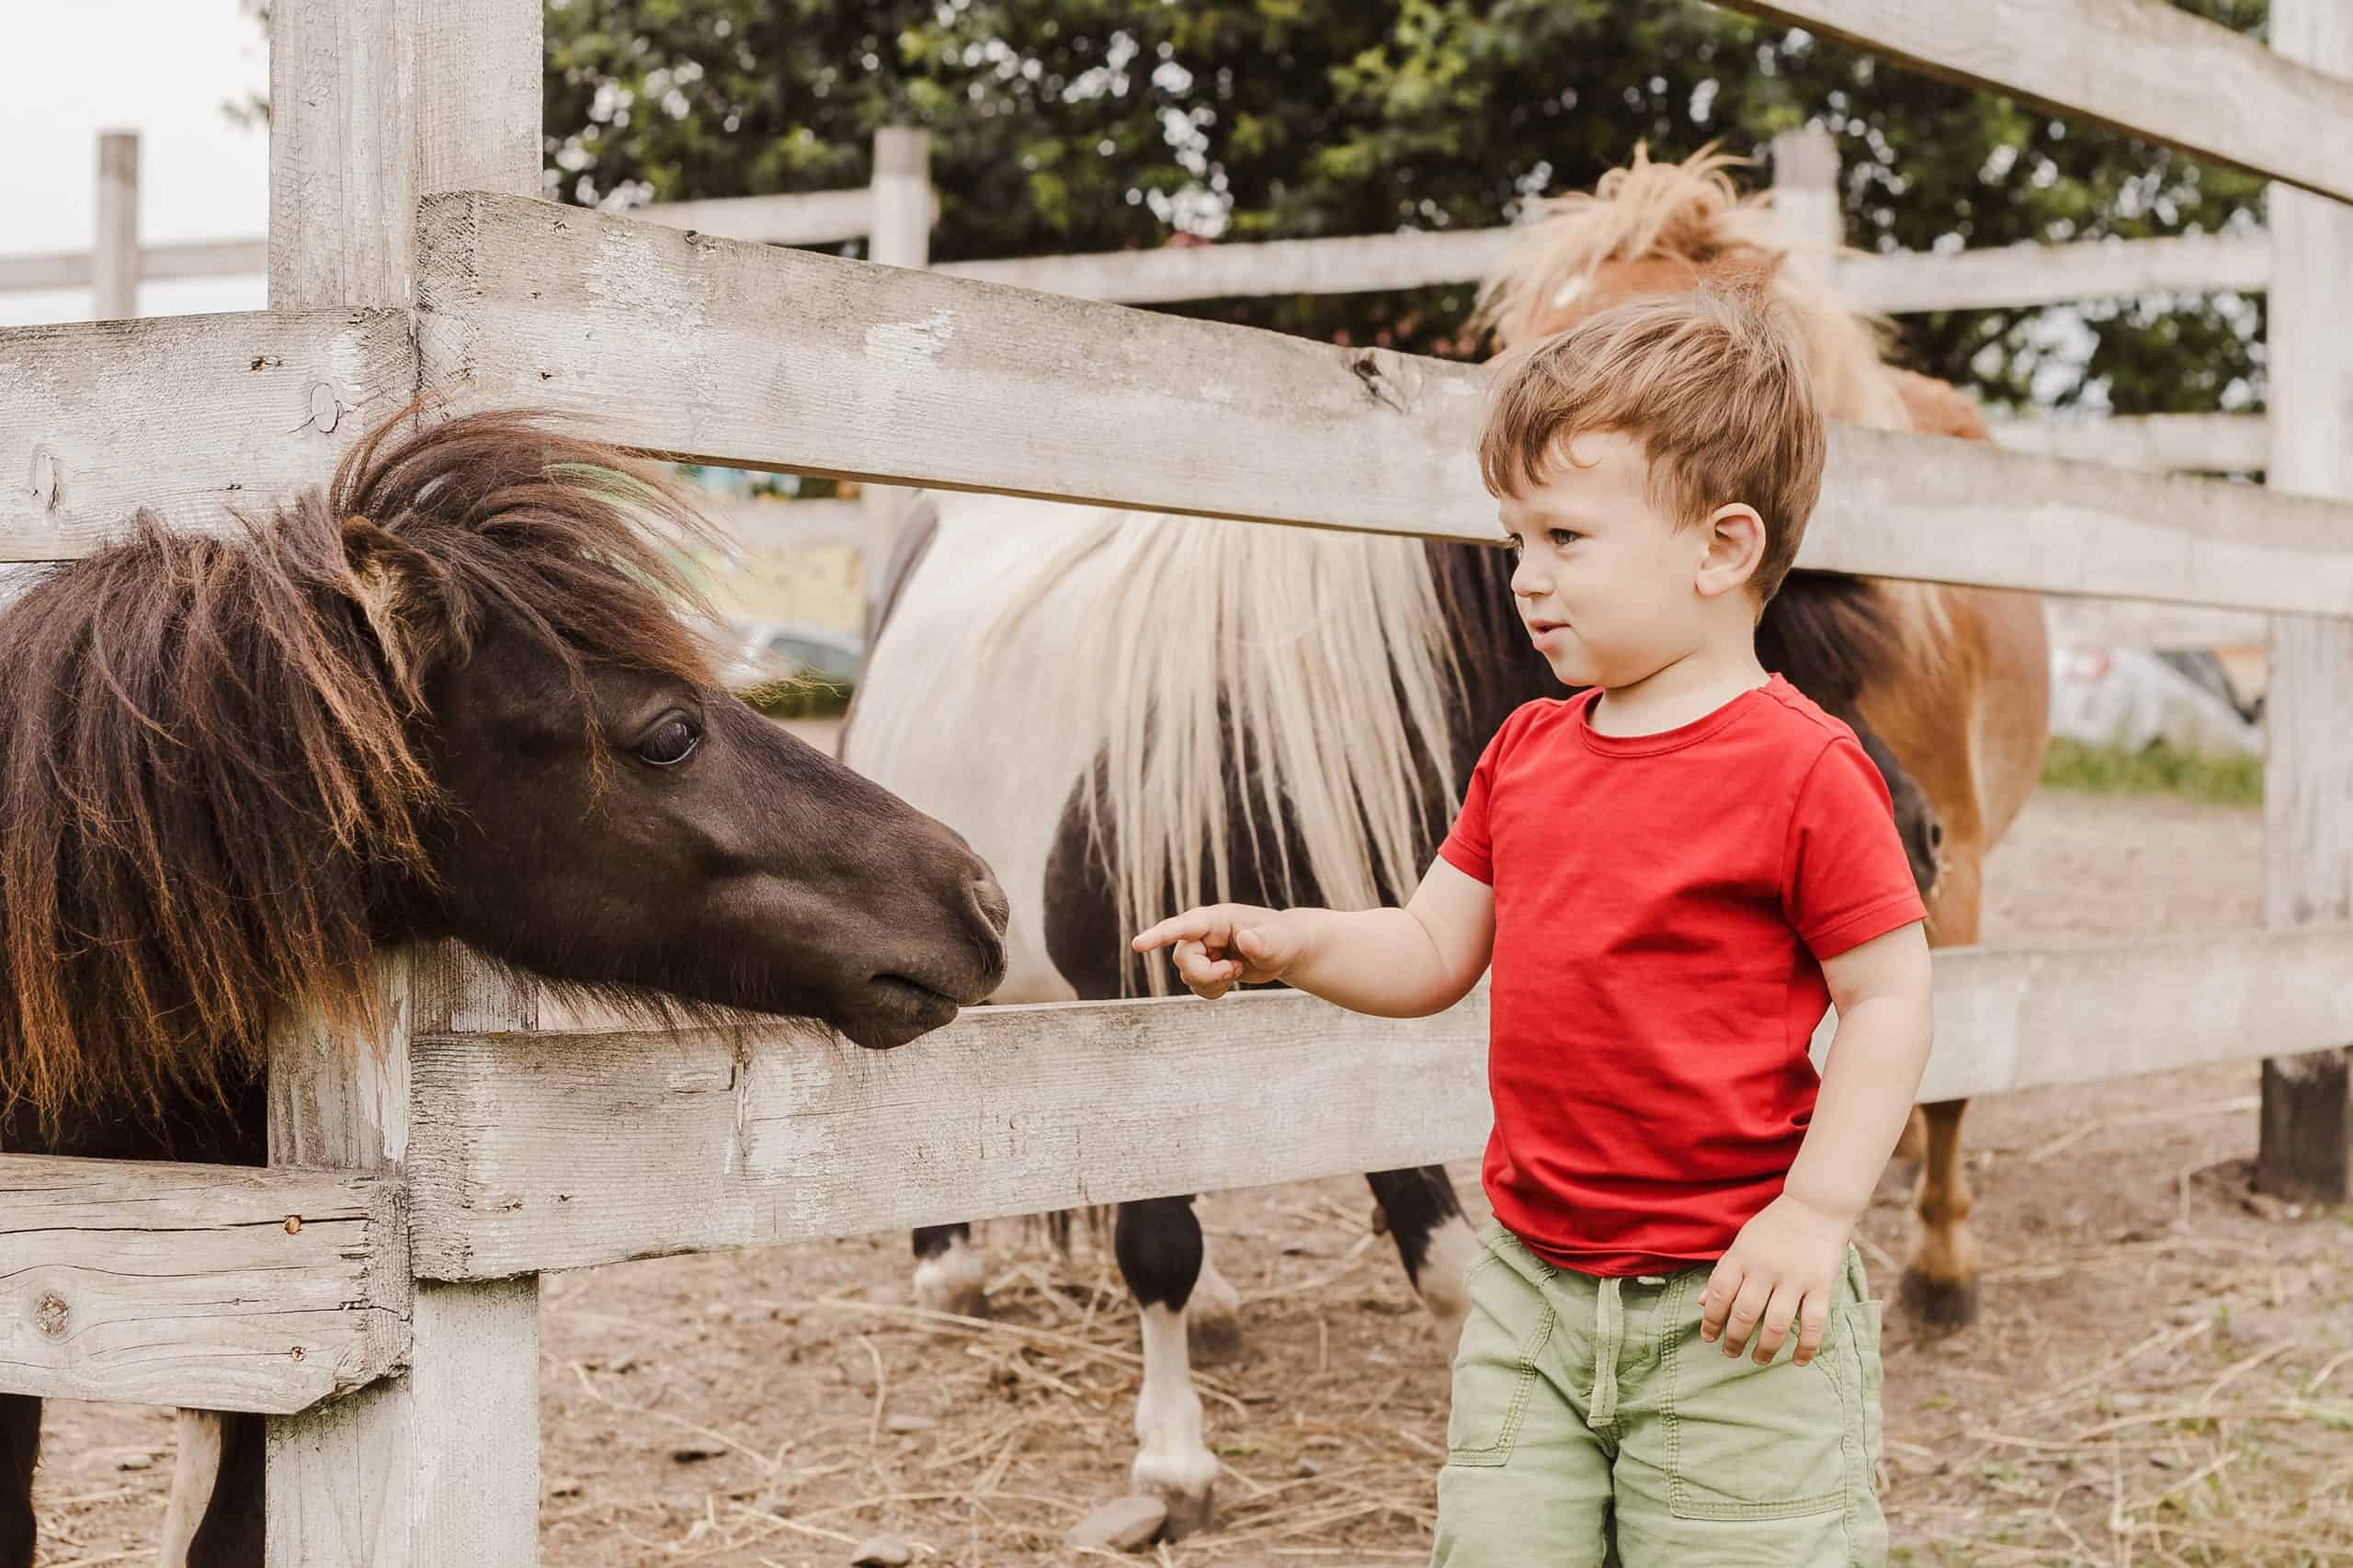 Toddler boy pointing his finger at pony horse at animal farm. Outdoor fun for kids. Child try to touch pony's nose